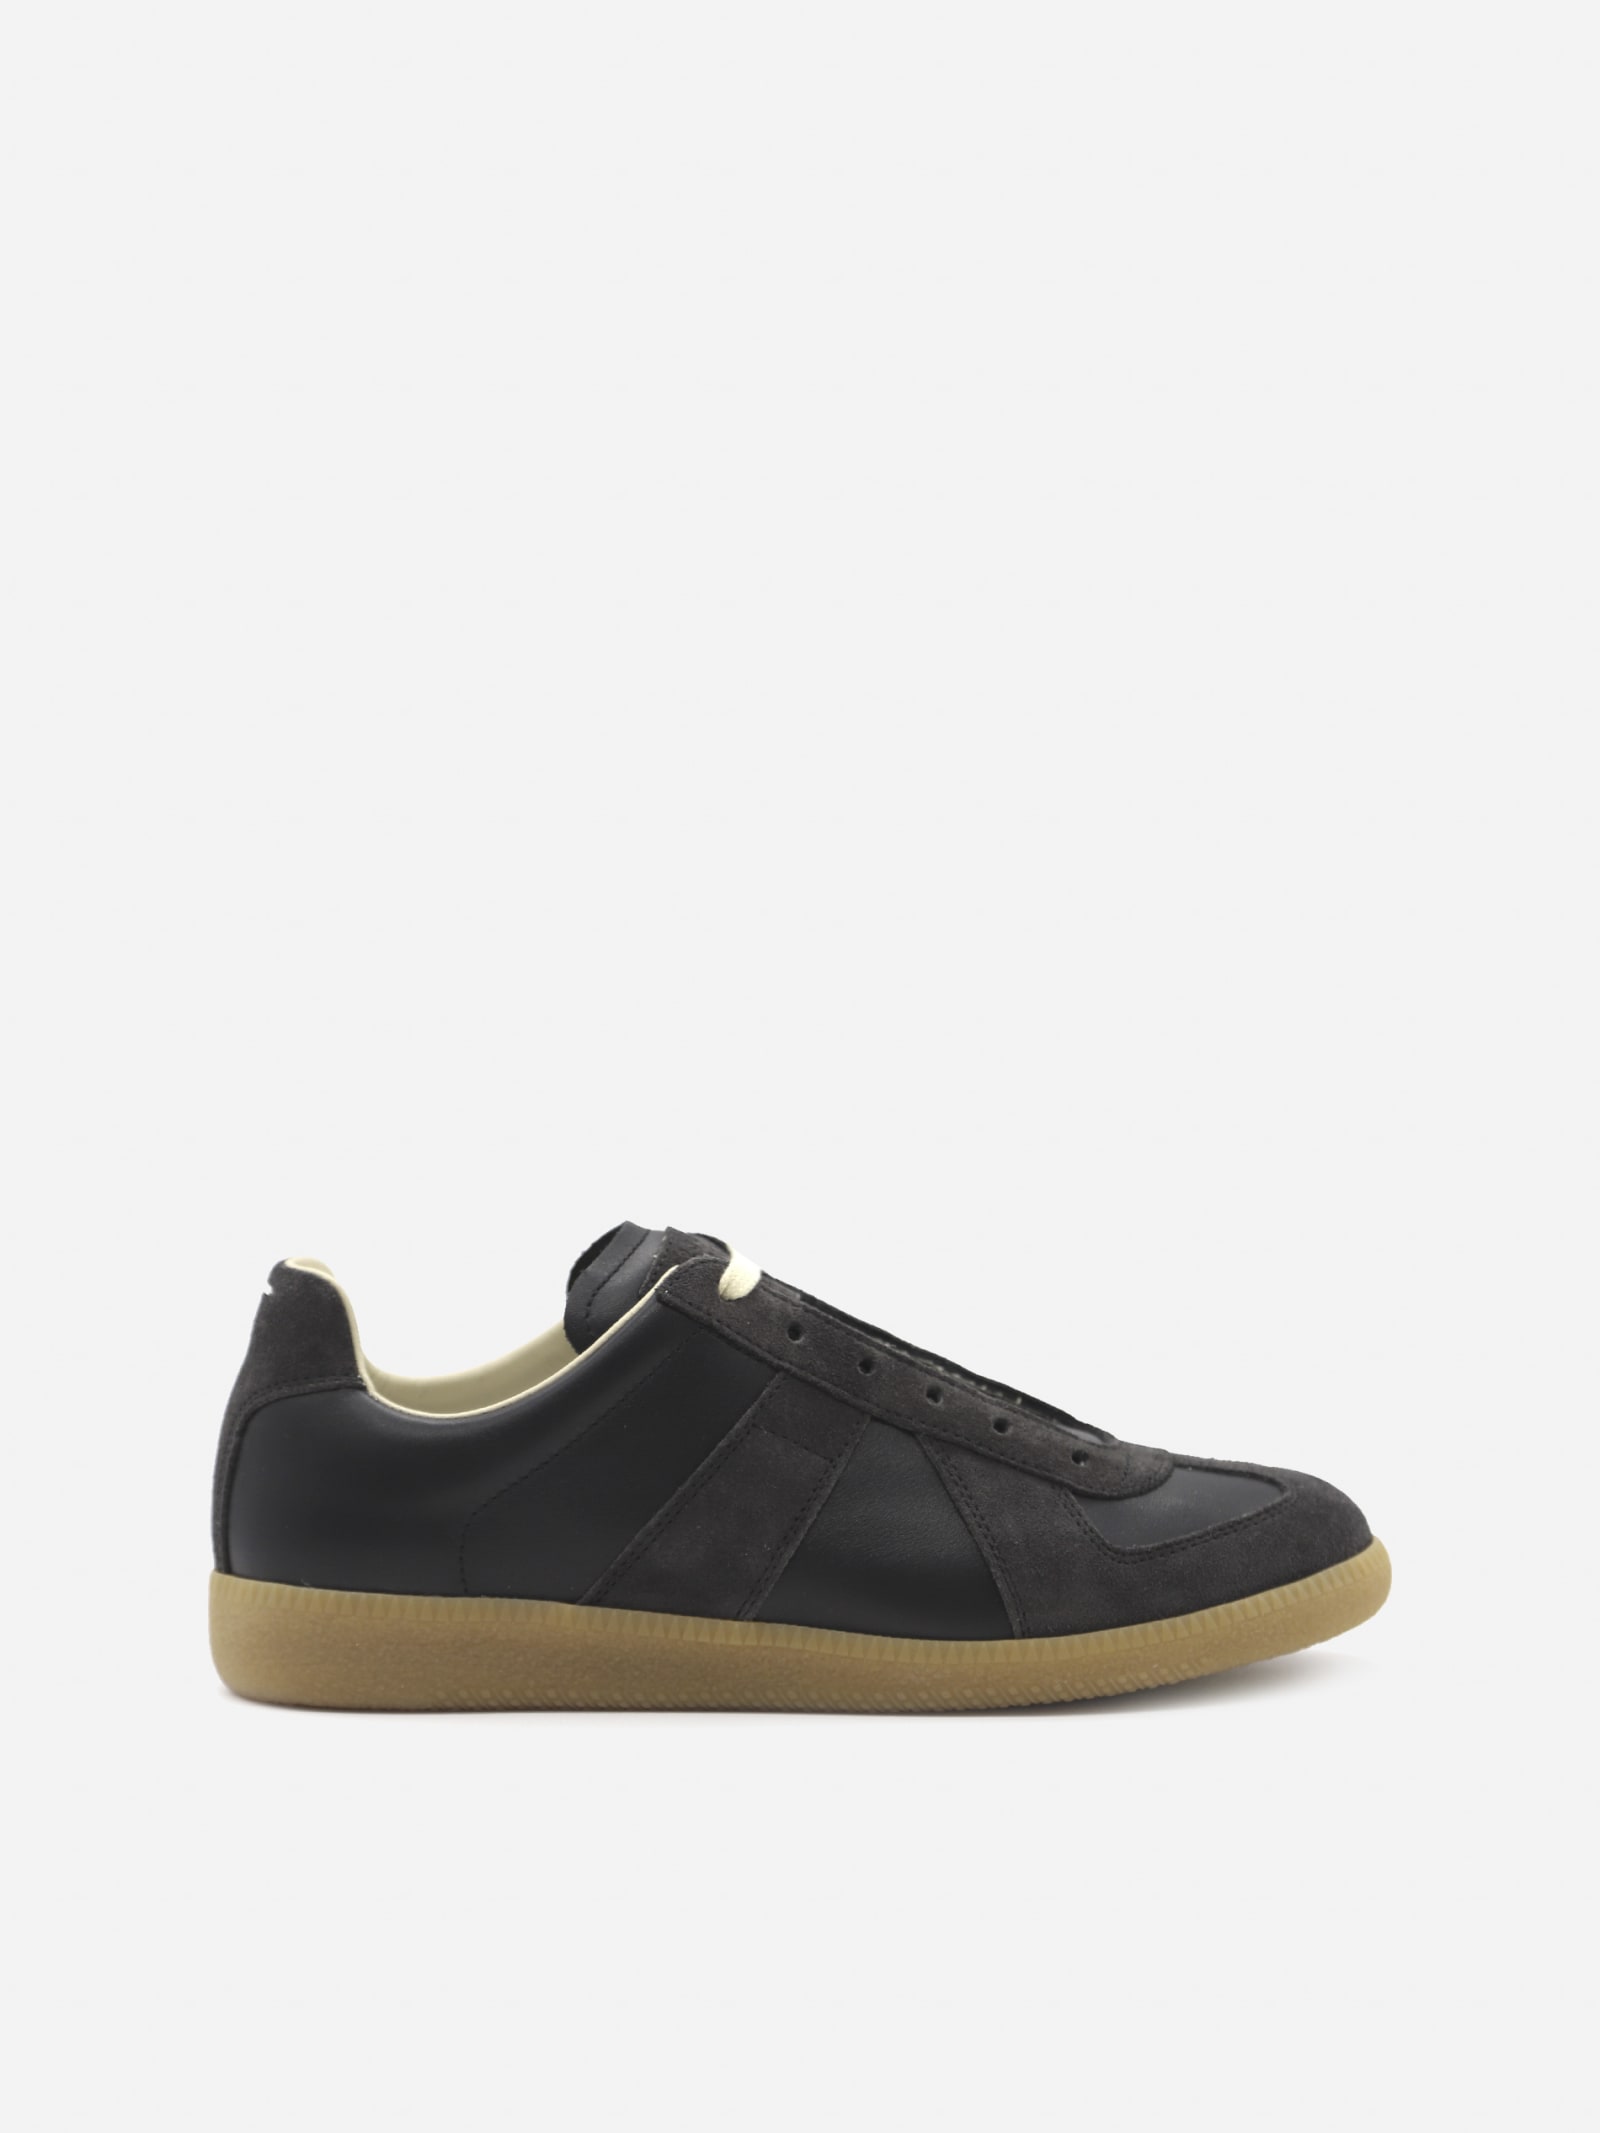 Maison Margiela Replica Low-top Sneakers In Leather And Suede